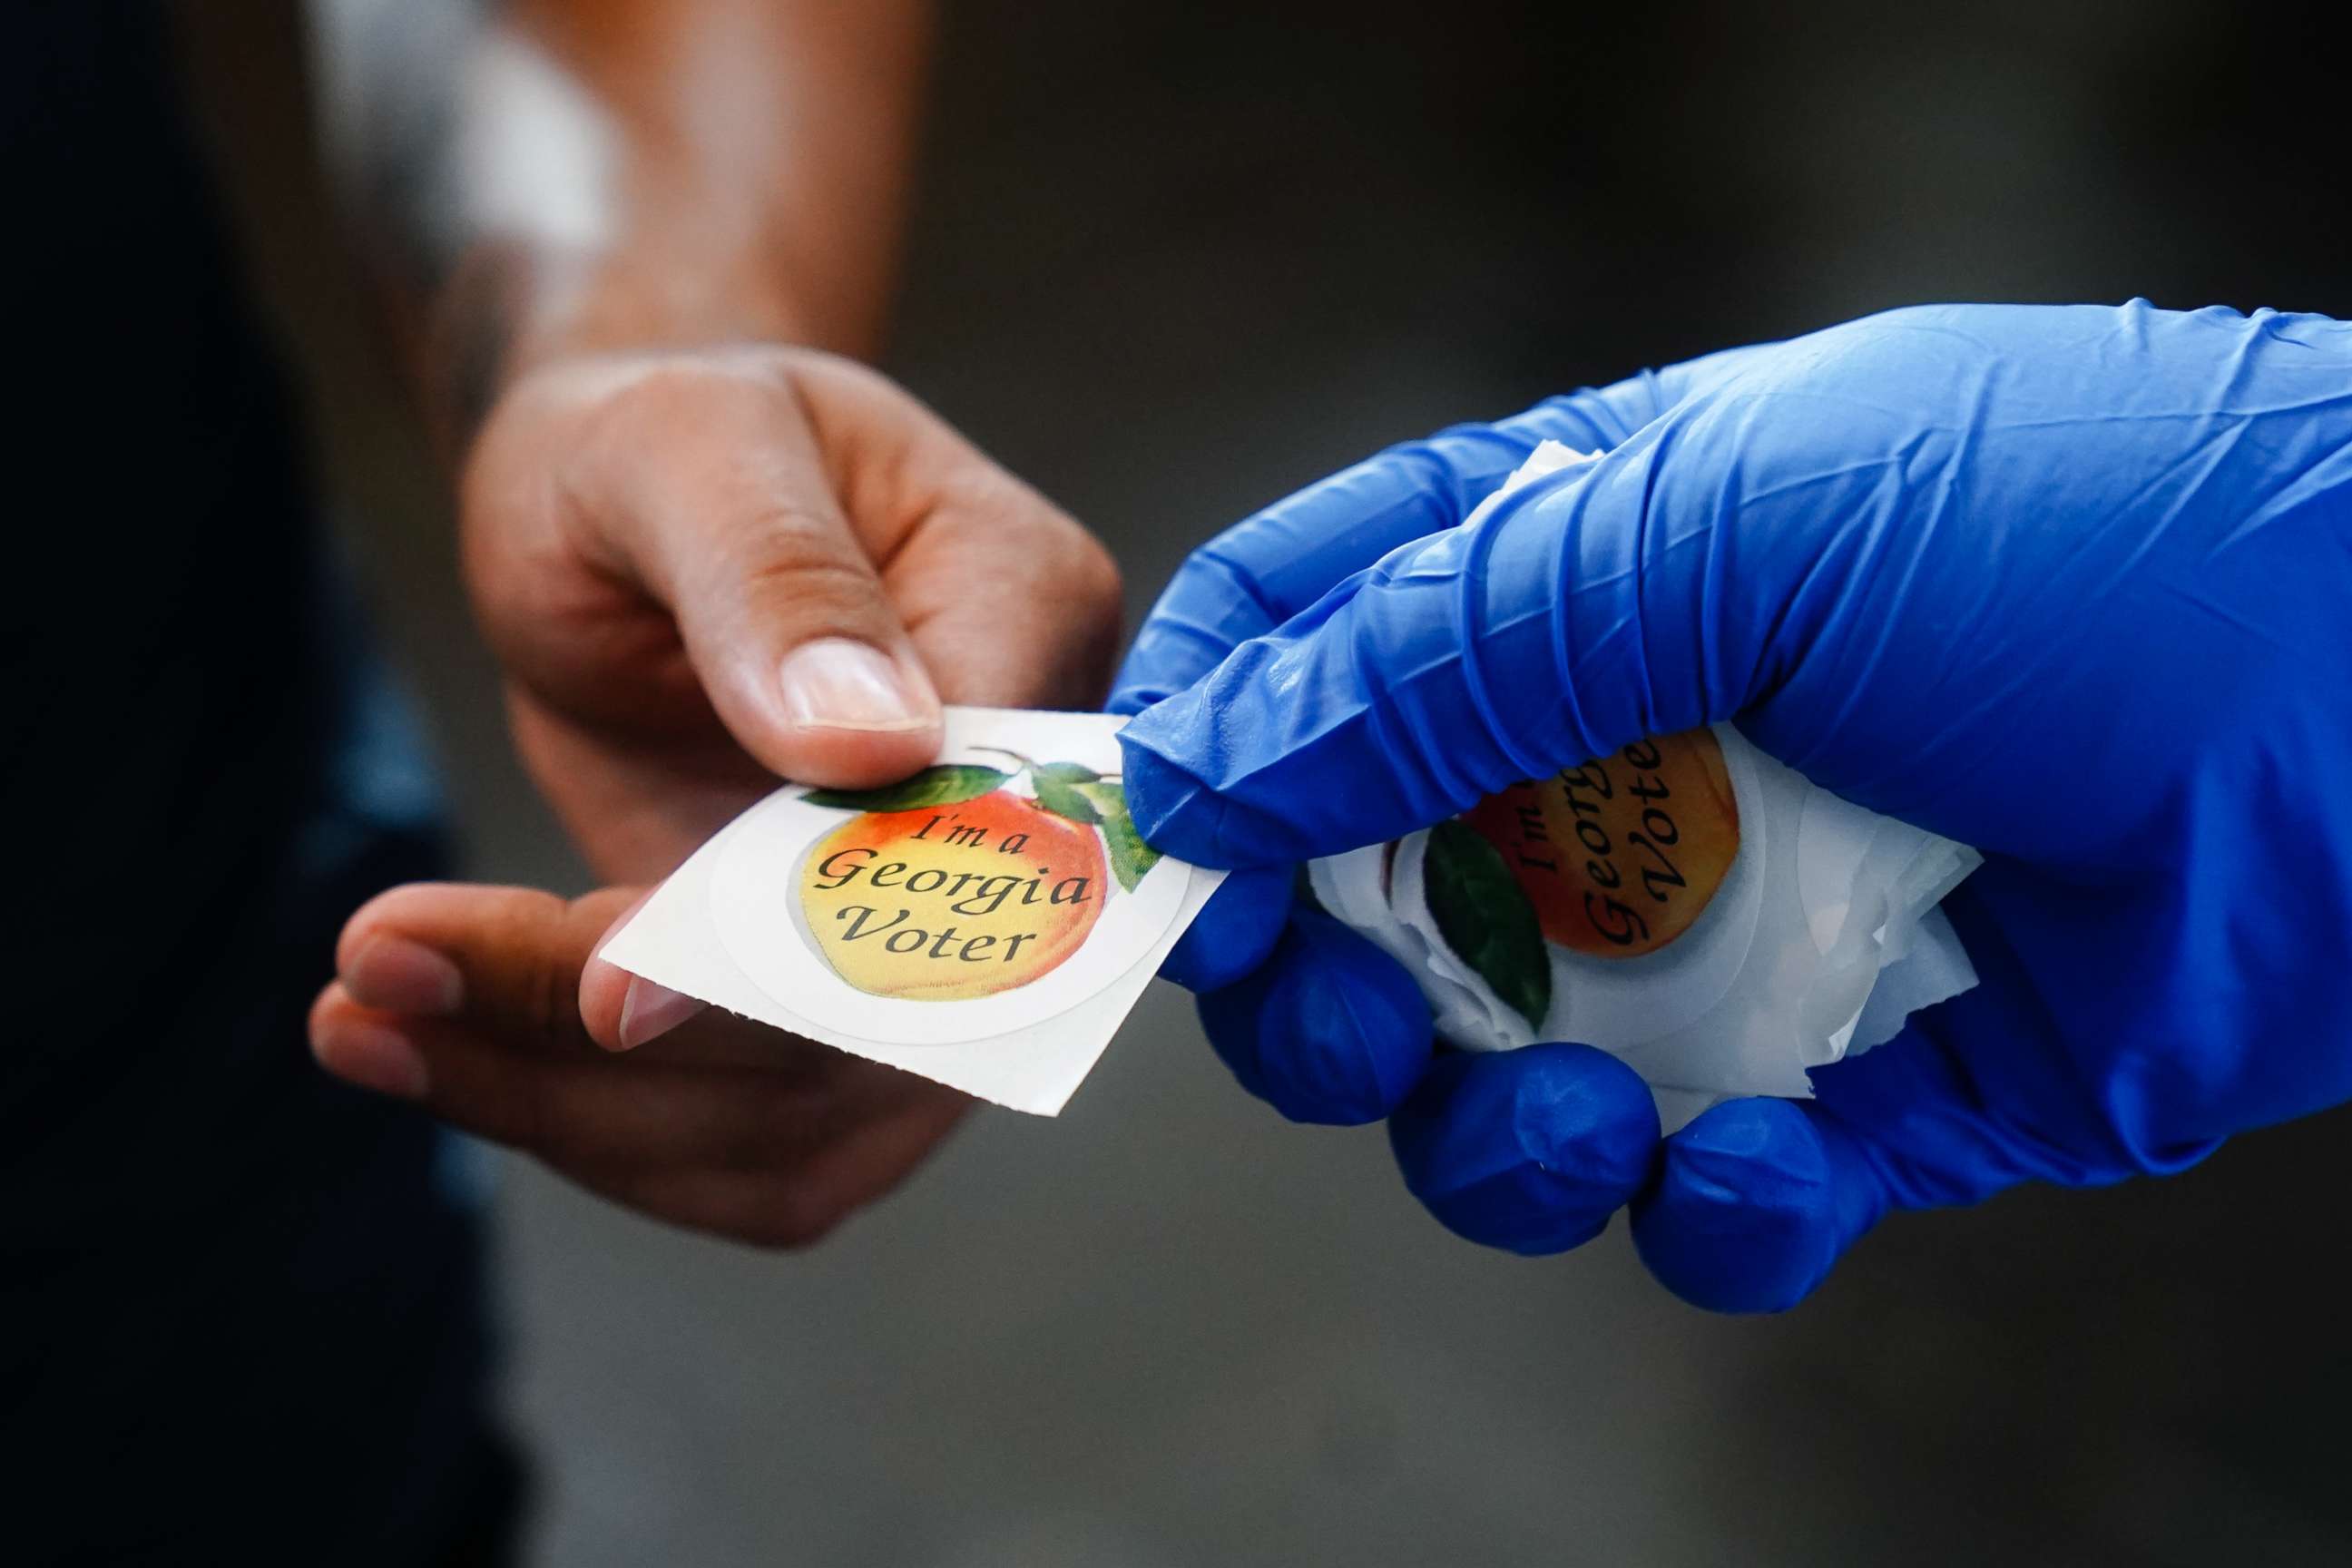 PHOTO: A man receives an "I'm a Georgia Voter" sticker after casting a ballot in Georgia's Primary Election, June 9, 2020, in Atlanta.